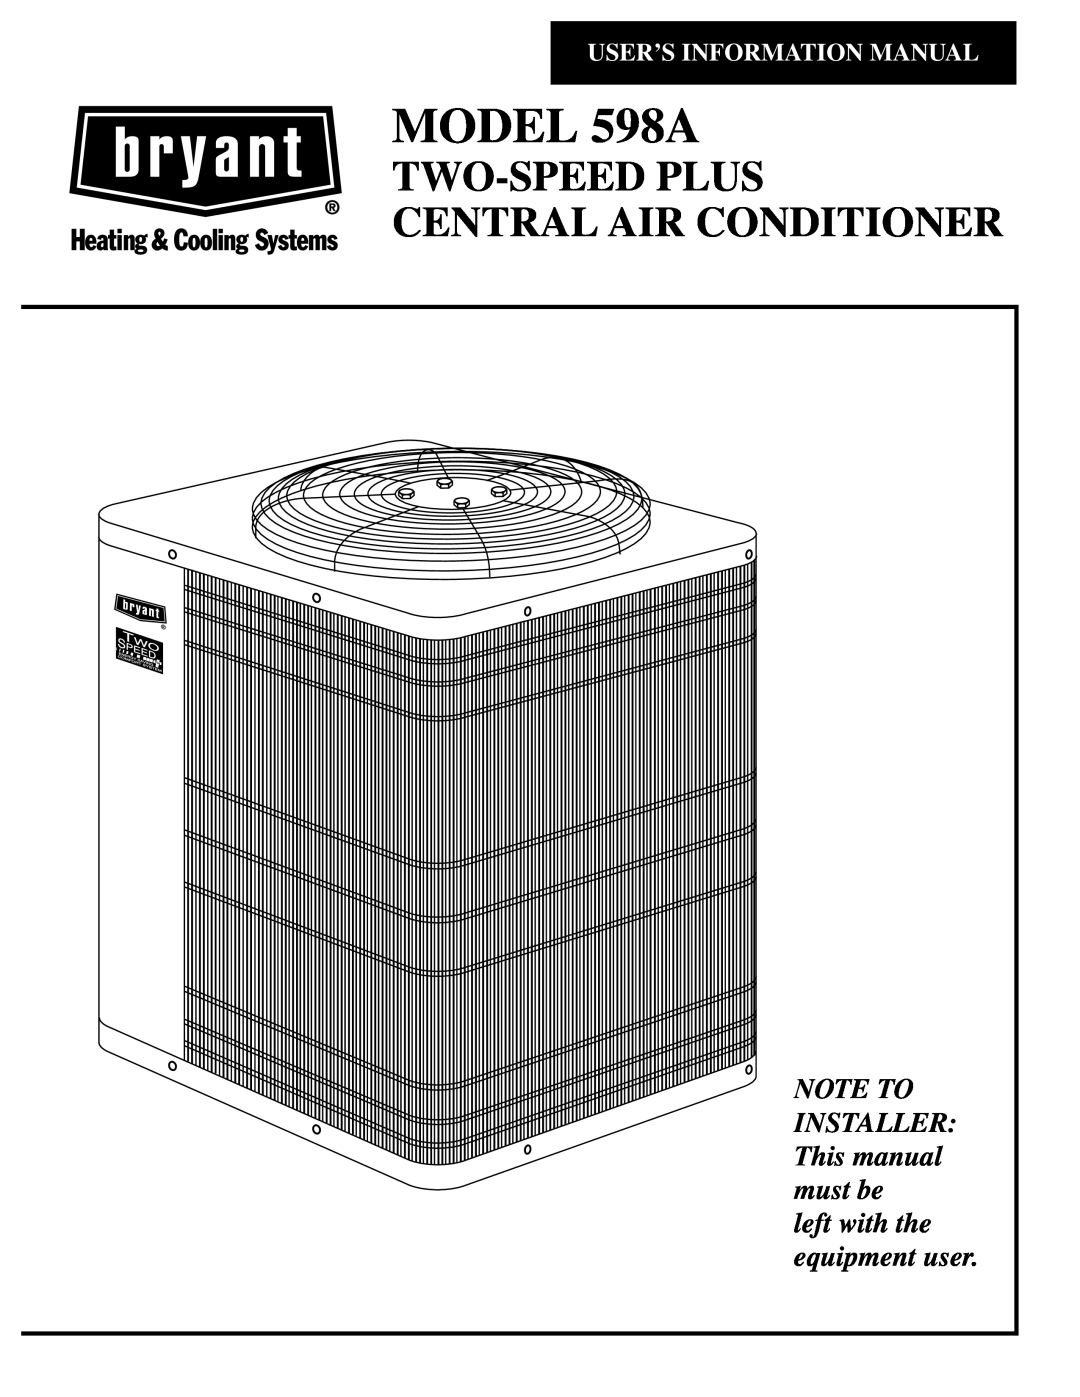 Bryant manual MODEL 598A, Two-Speedplus Central Air Conditioner, NOTE TO INSTALLER This manual must be 